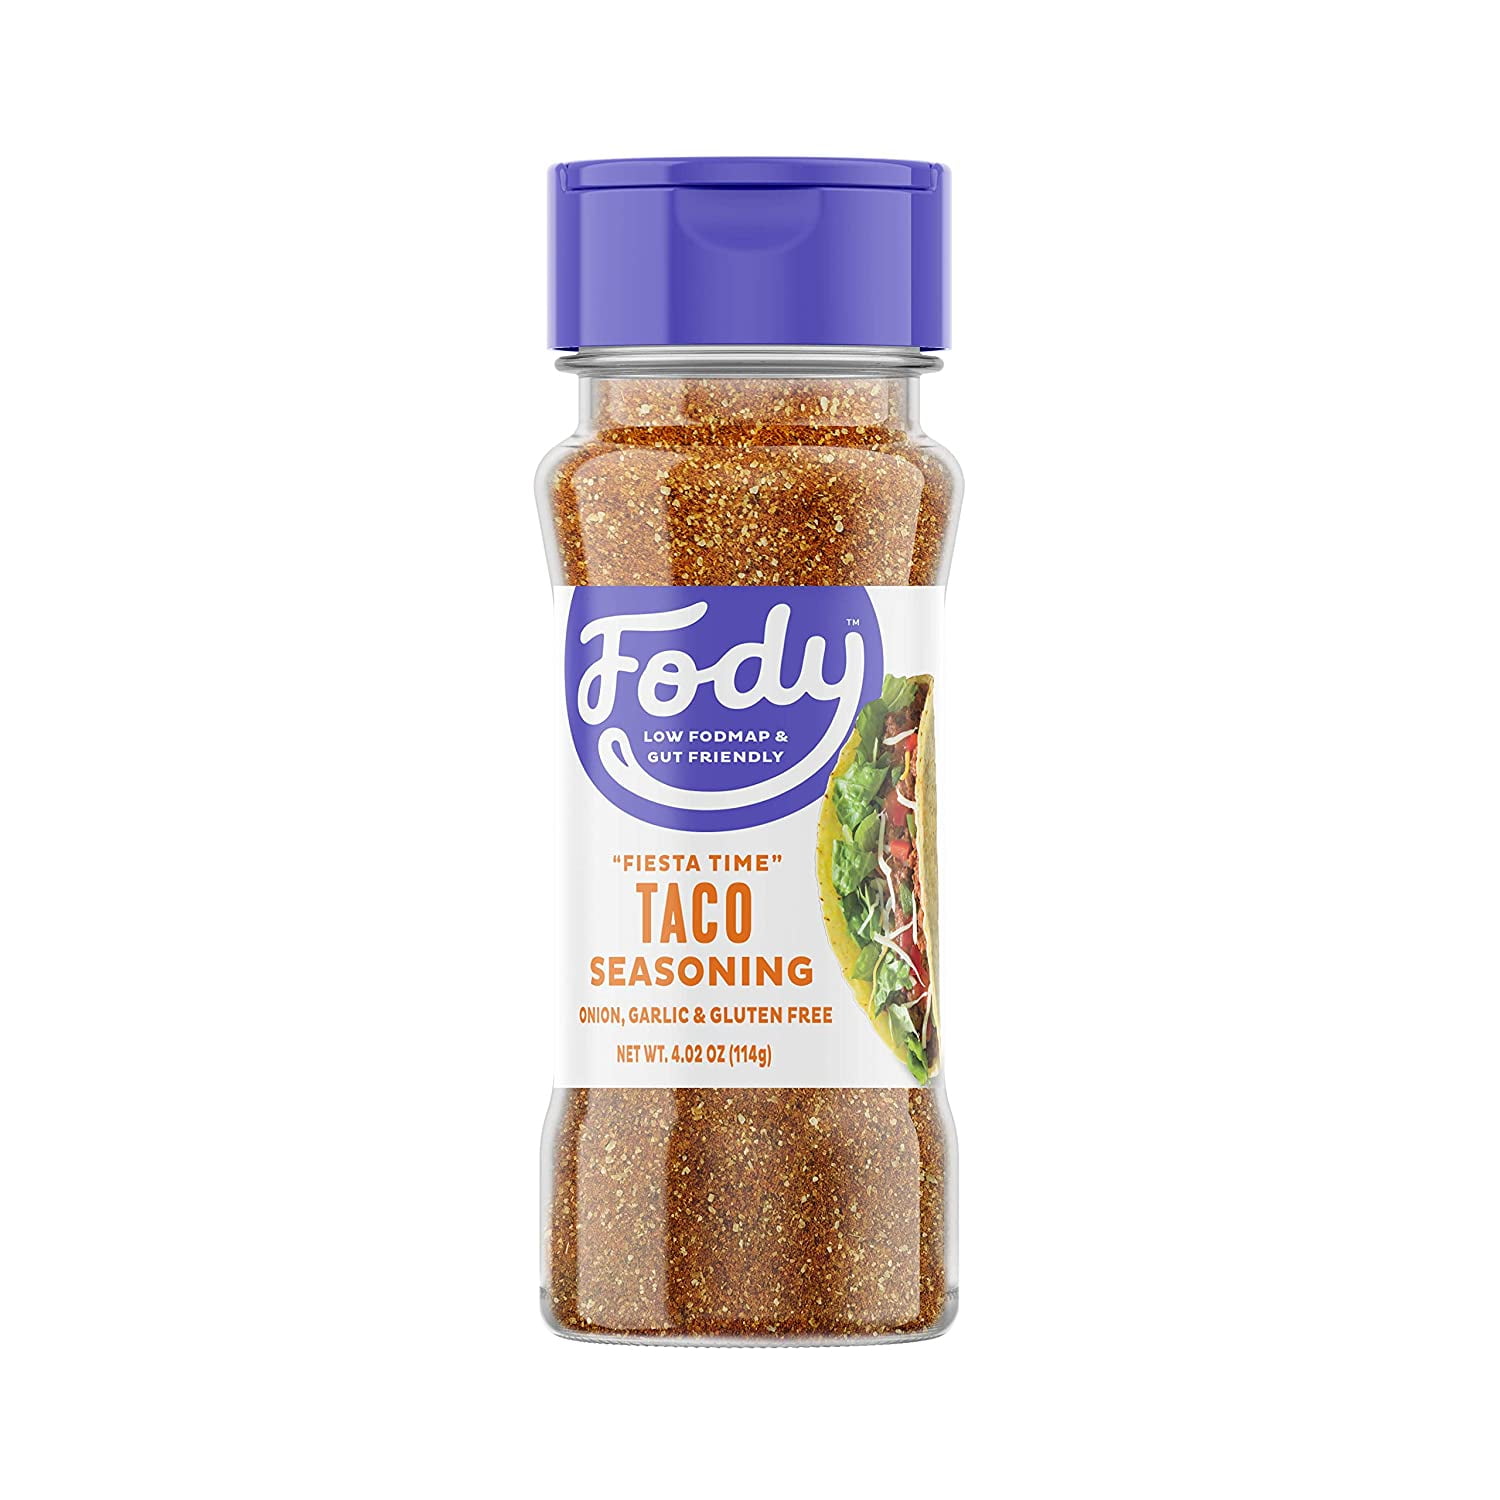 Fodmazing, Low Fodmap Spice Mix, Chili Spice Mix, No Onion, No Garlic, IBS  Friendly, Non GMO, Gluten Free, Great for Food and Snacks (16 Servings)